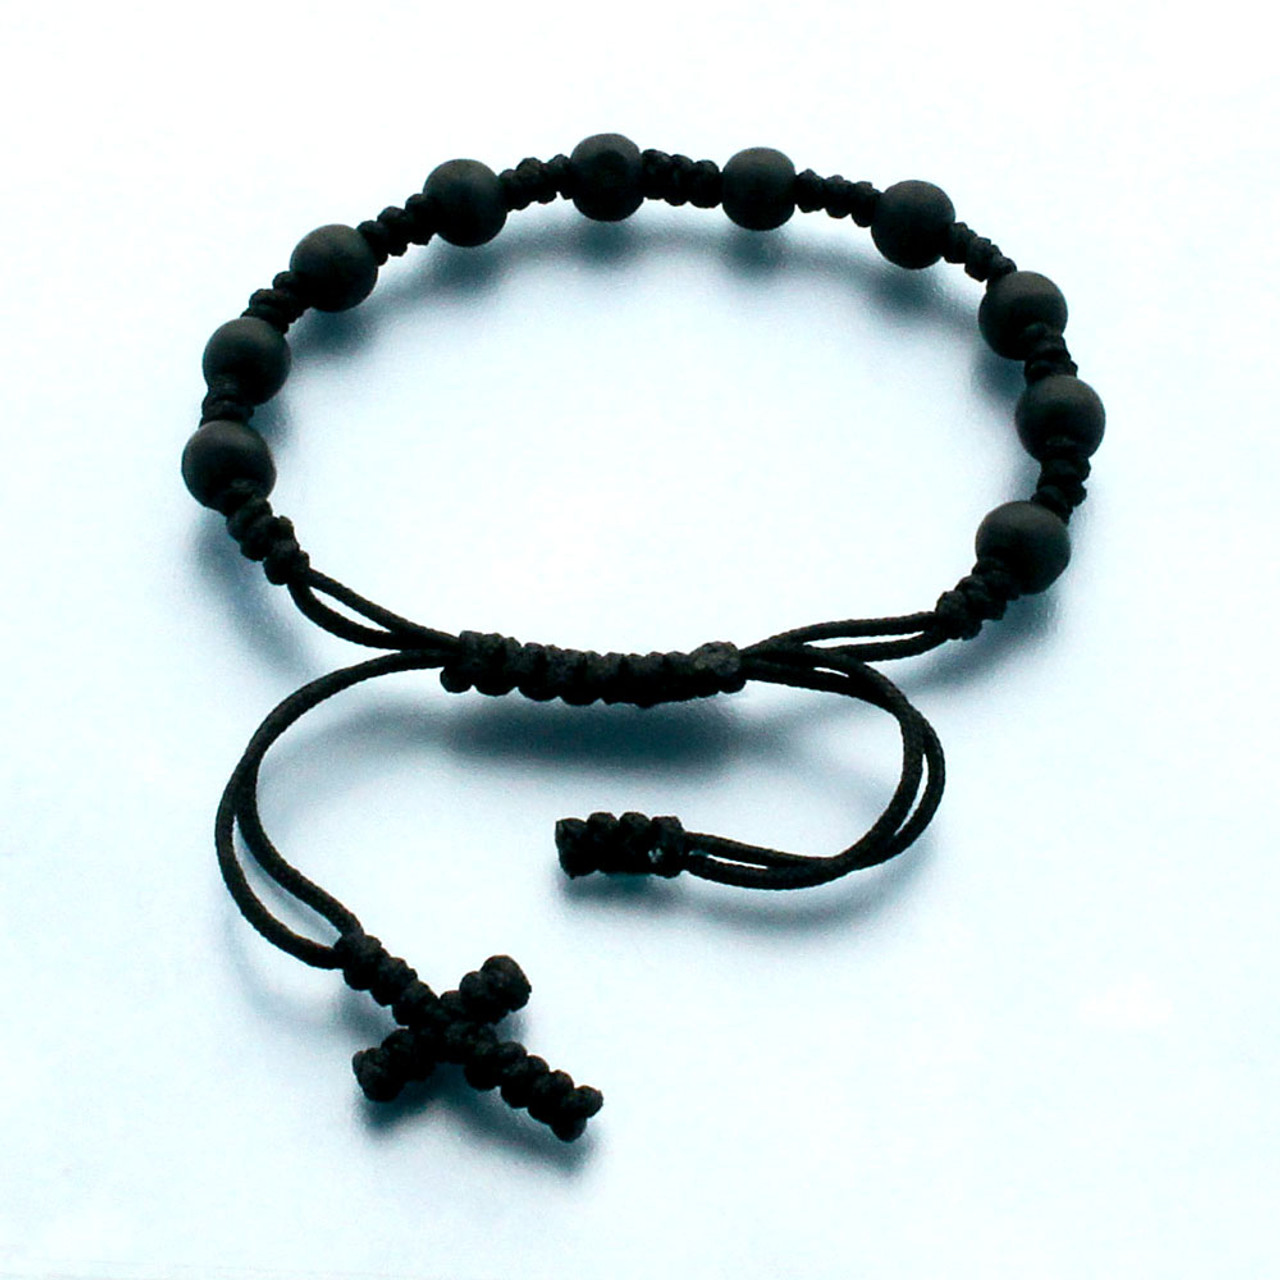 Black Wooden Beads, Rosary Making Supplies